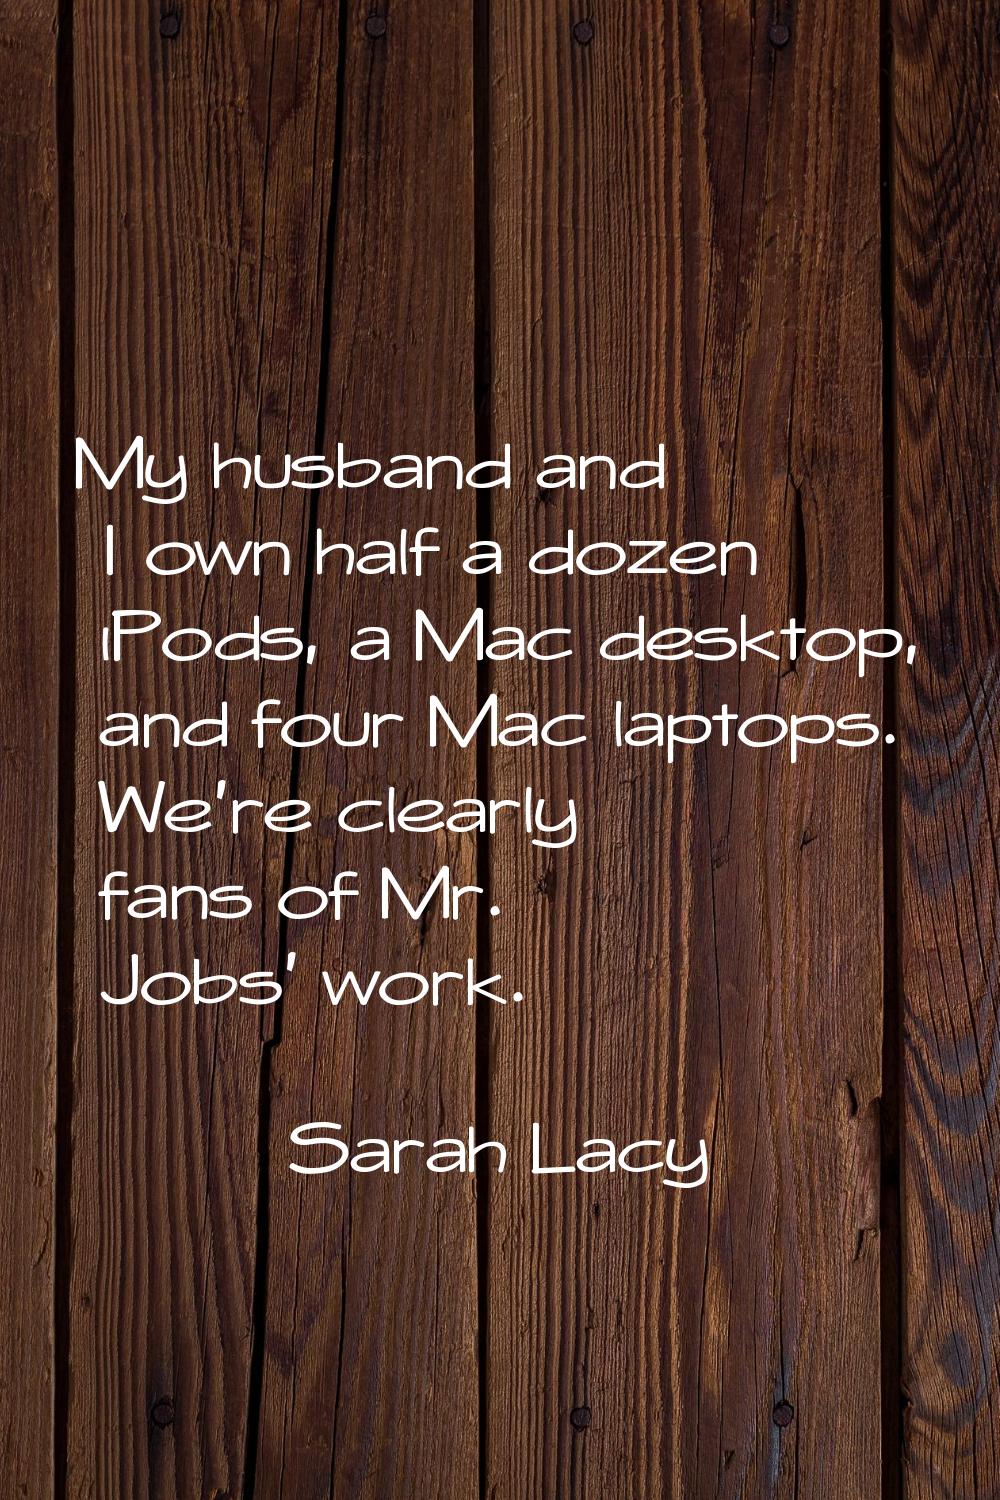 My husband and I own half a dozen iPods, a Mac desktop, and four Mac laptops. We're clearly fans of